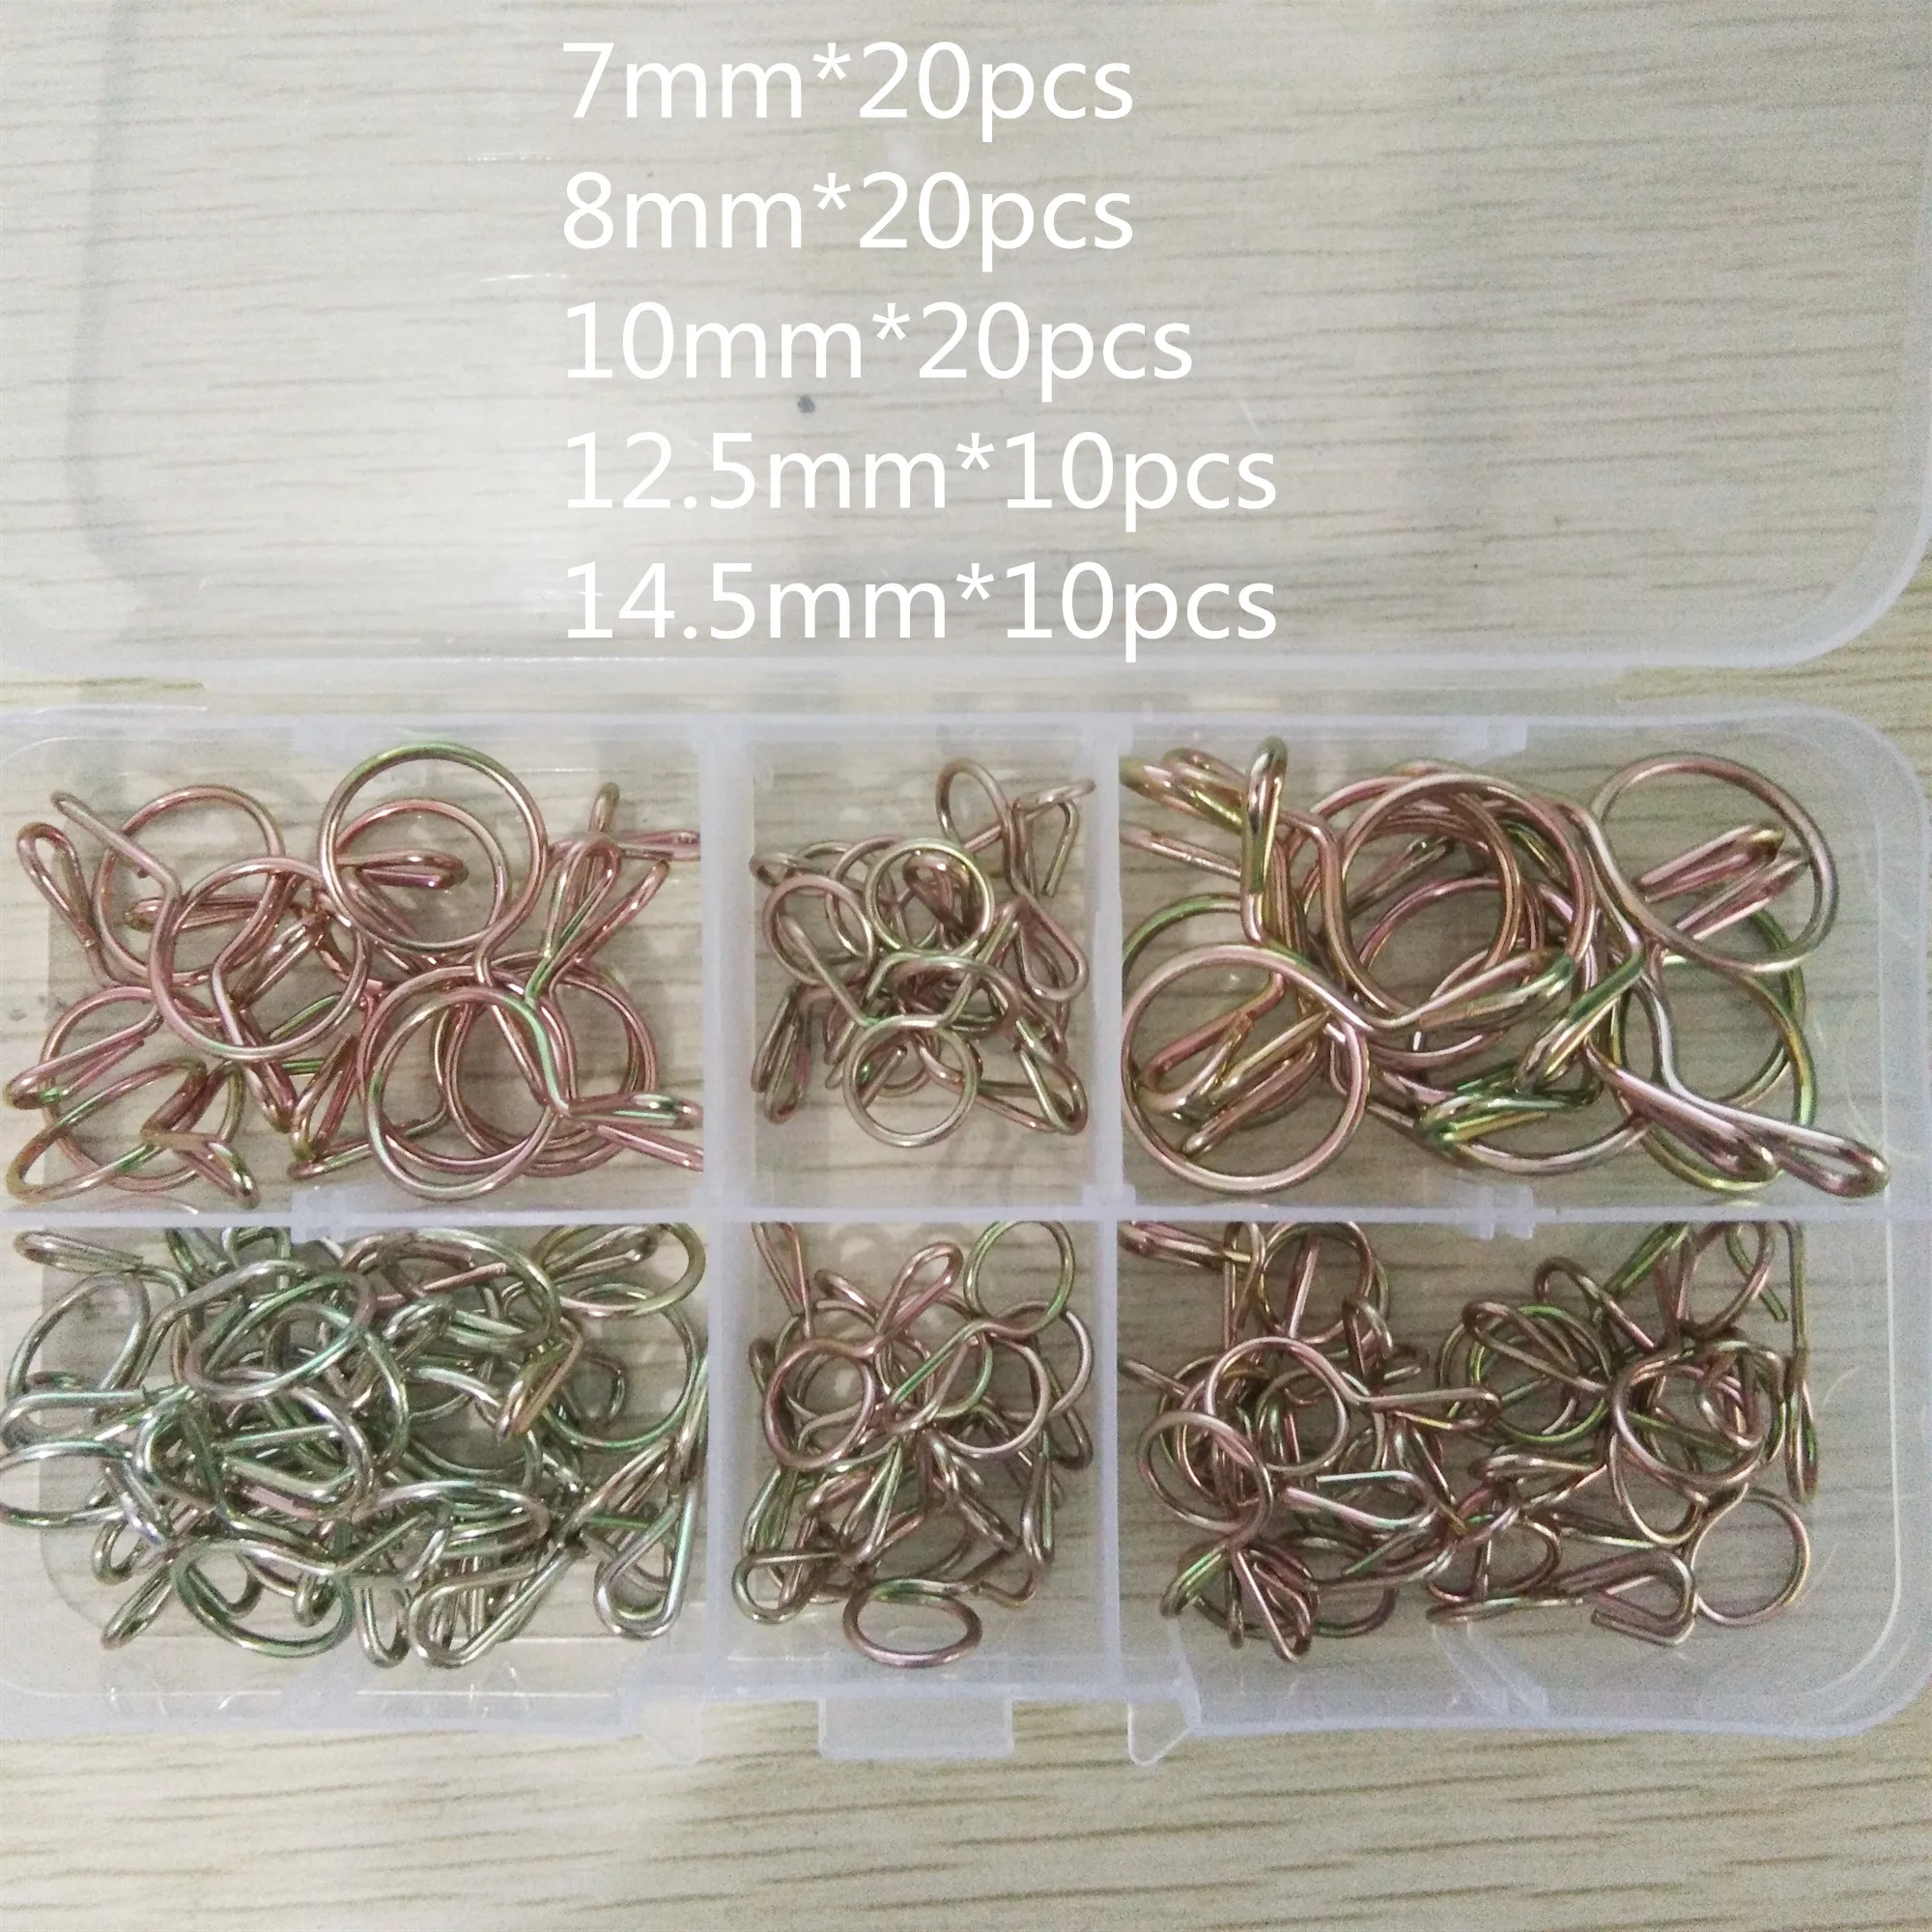 uxcell Double Wire Motorcycle ATV 8mm Fuel Line Silicone Hose Tube Spring Clips Clamp Zinc Plated 20Pcs